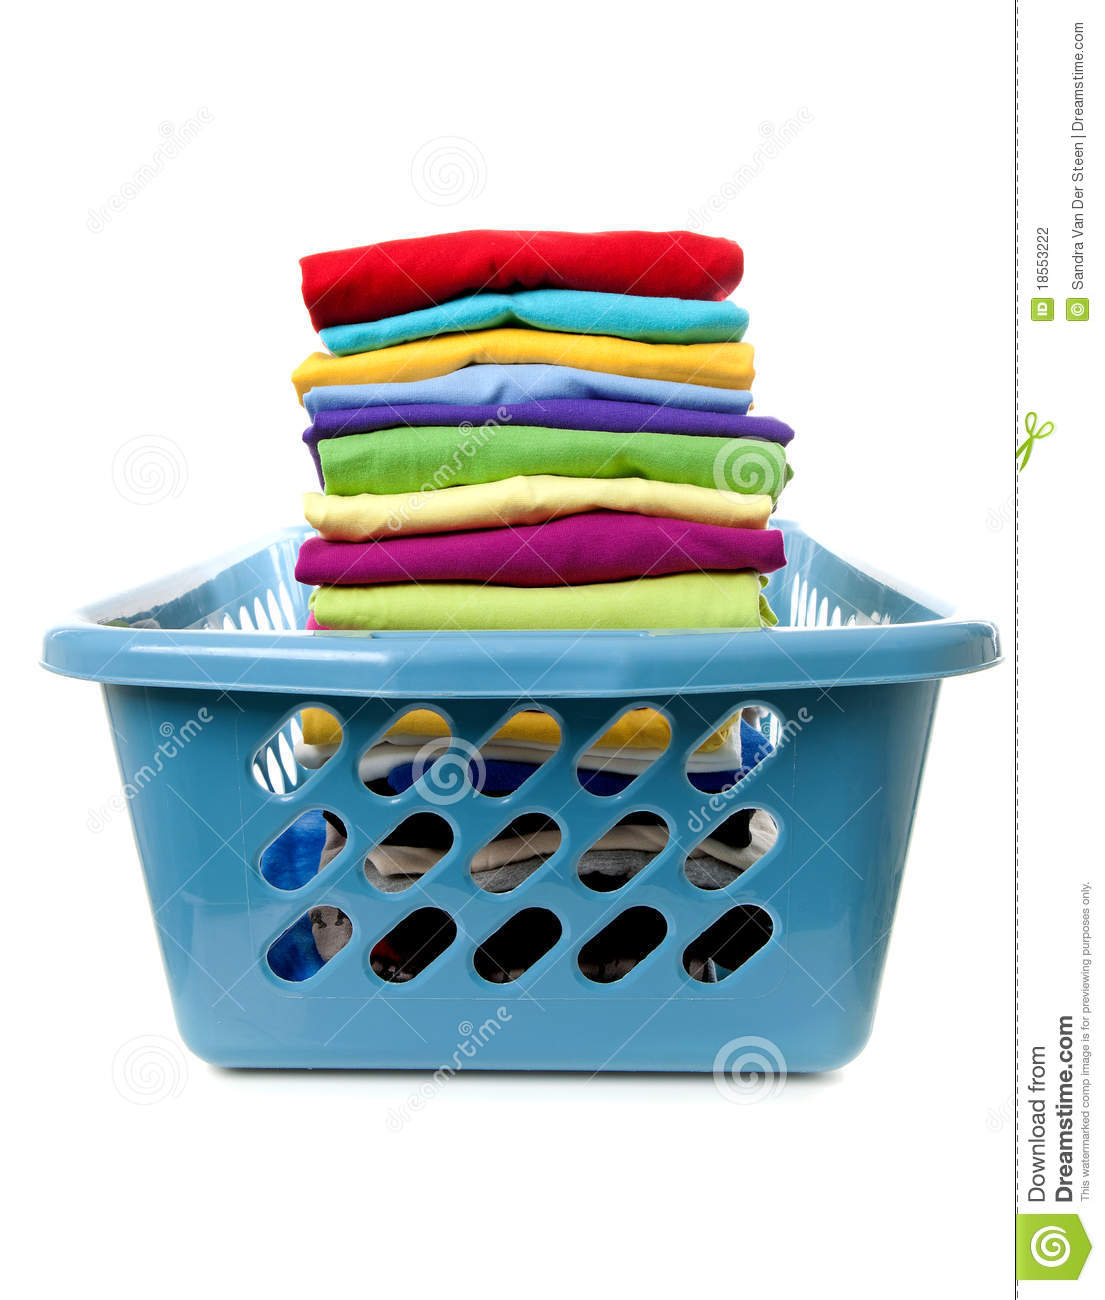 Laundry Basket With Folded Clothes Stock Photography   Image  18553222